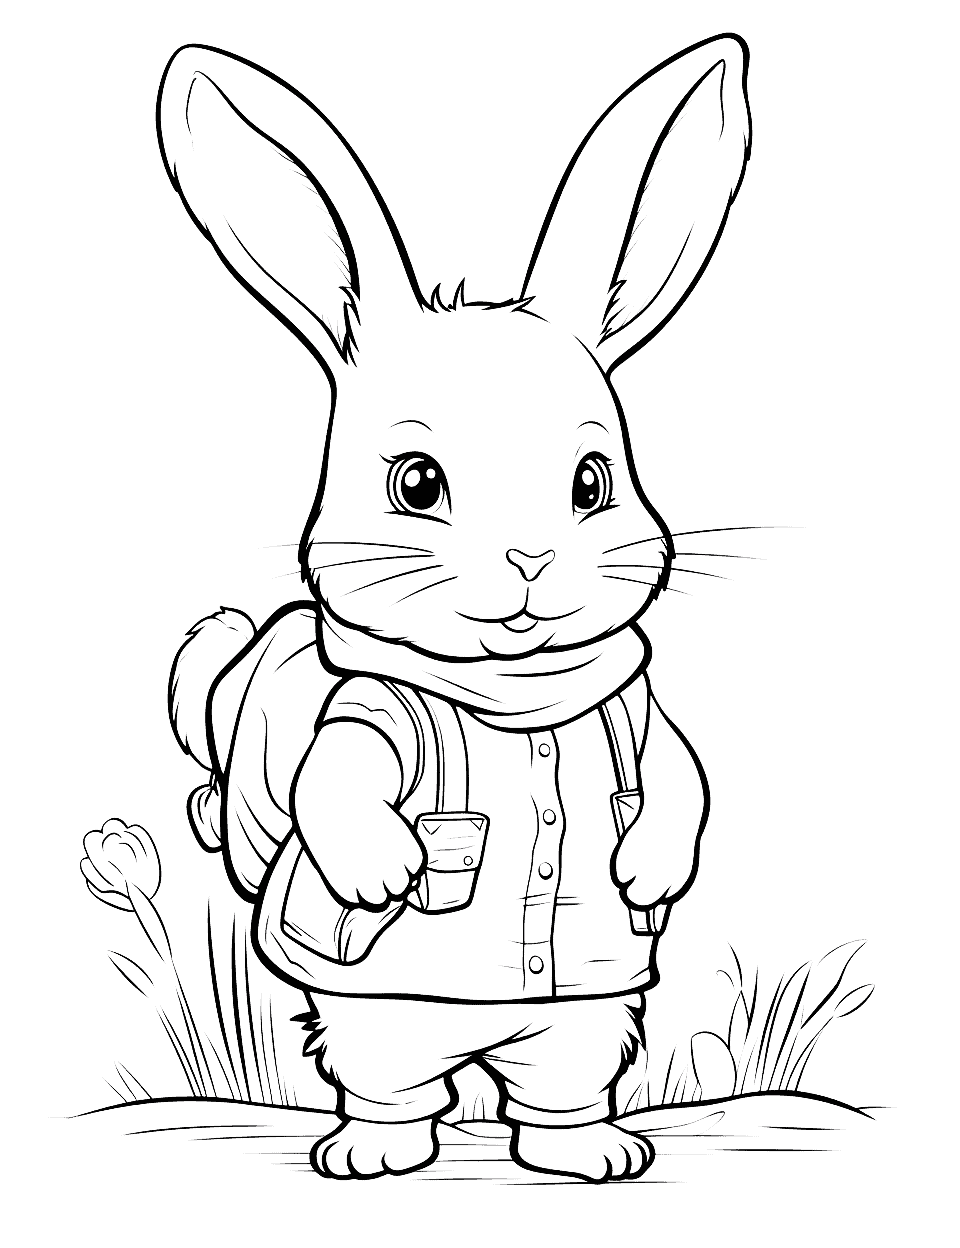 Bunny Boy's Expedition Coloring Page - A male bunny with a small backpack, ready to explore.